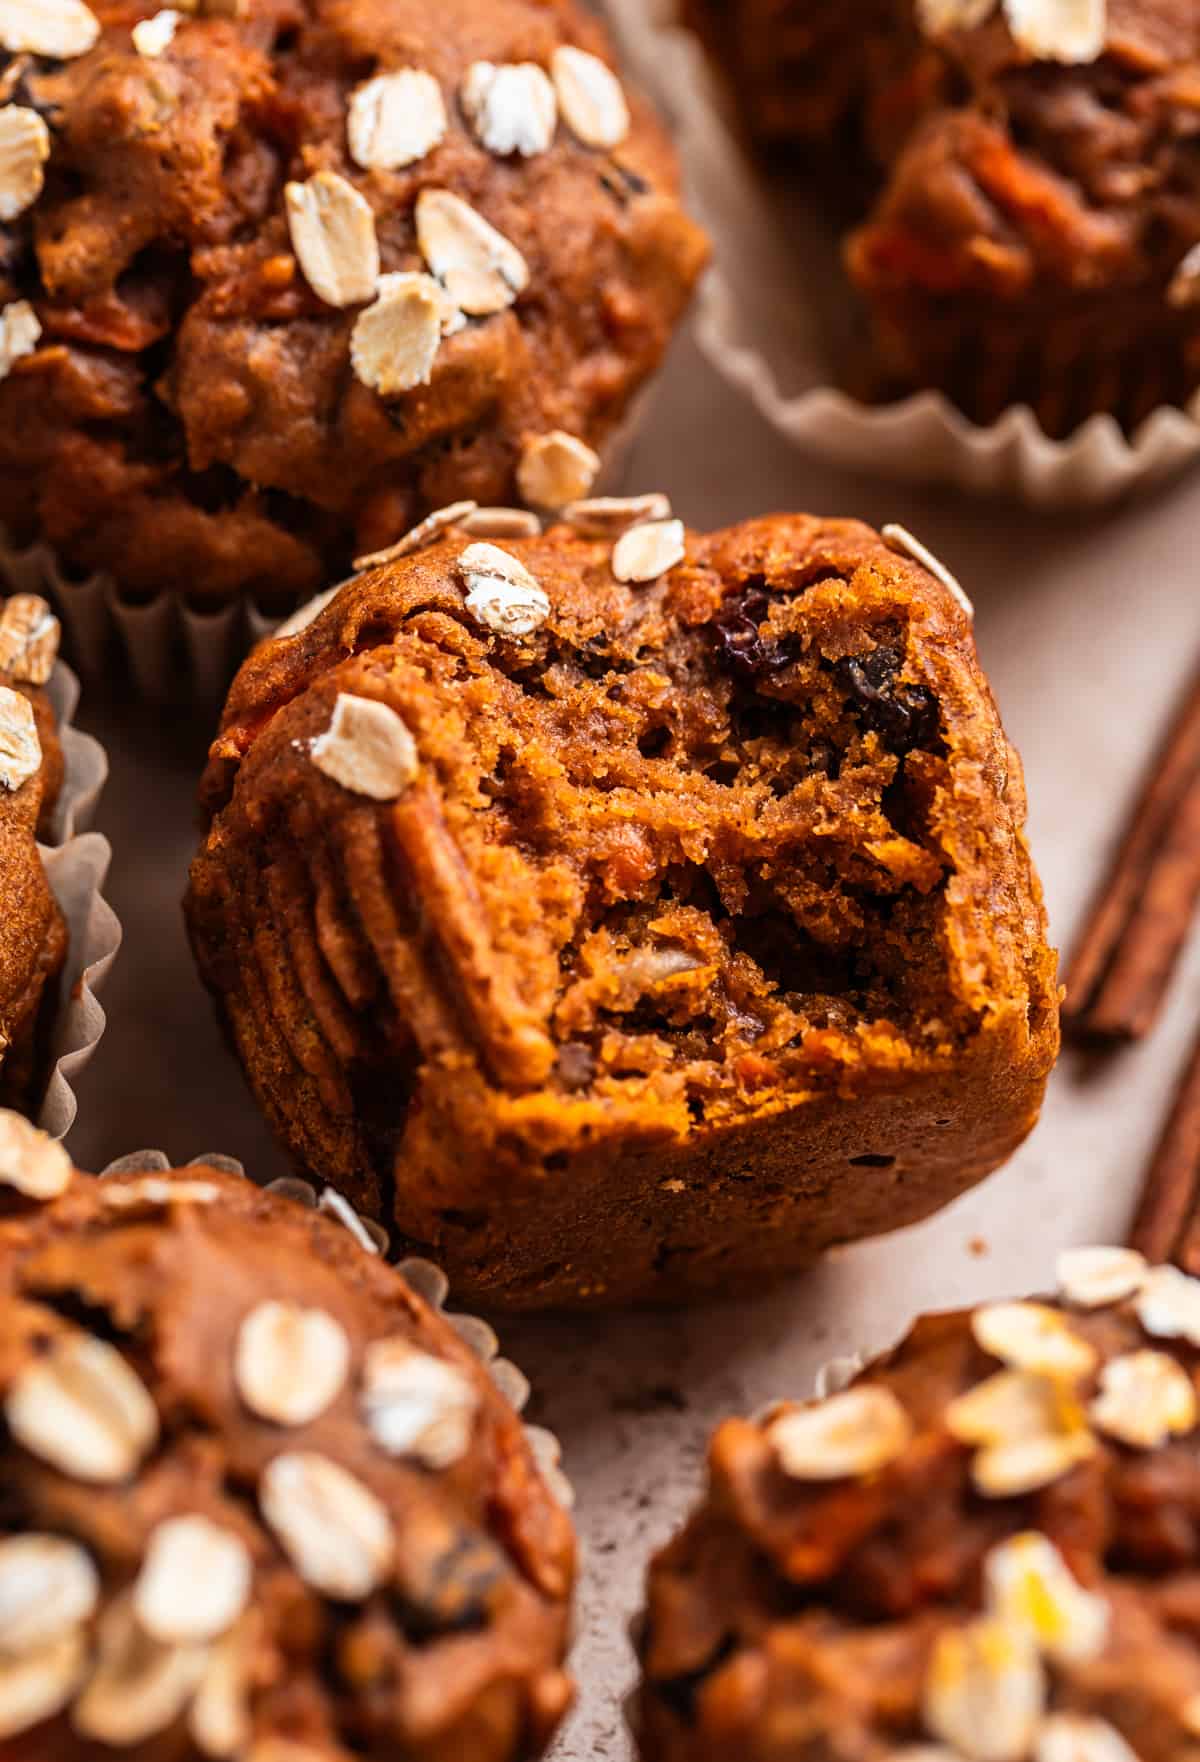 Bite shot of pumpkin carrot muffin surrounded by other muffins and two cinnamon sticks.